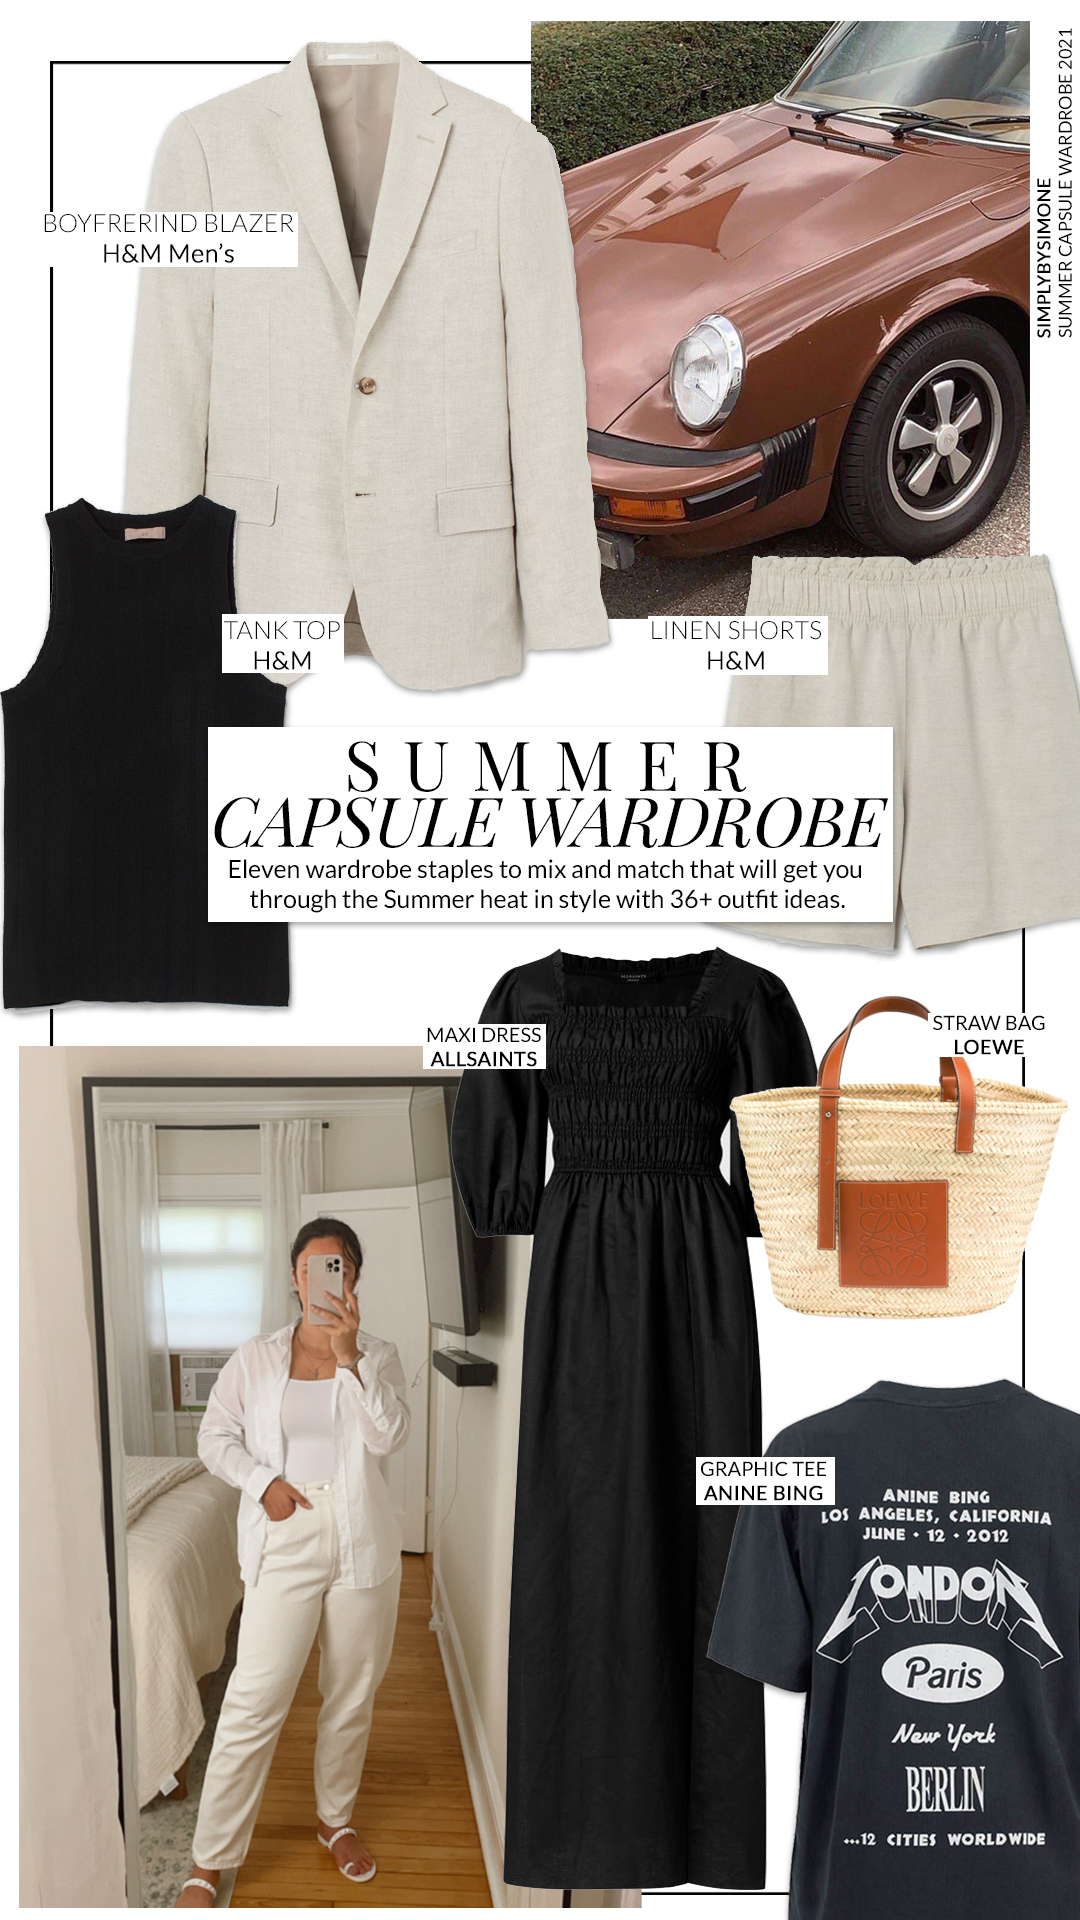 Summer Capsule Wardrobe - 11 Items 36 Outfit Ideas for Summer